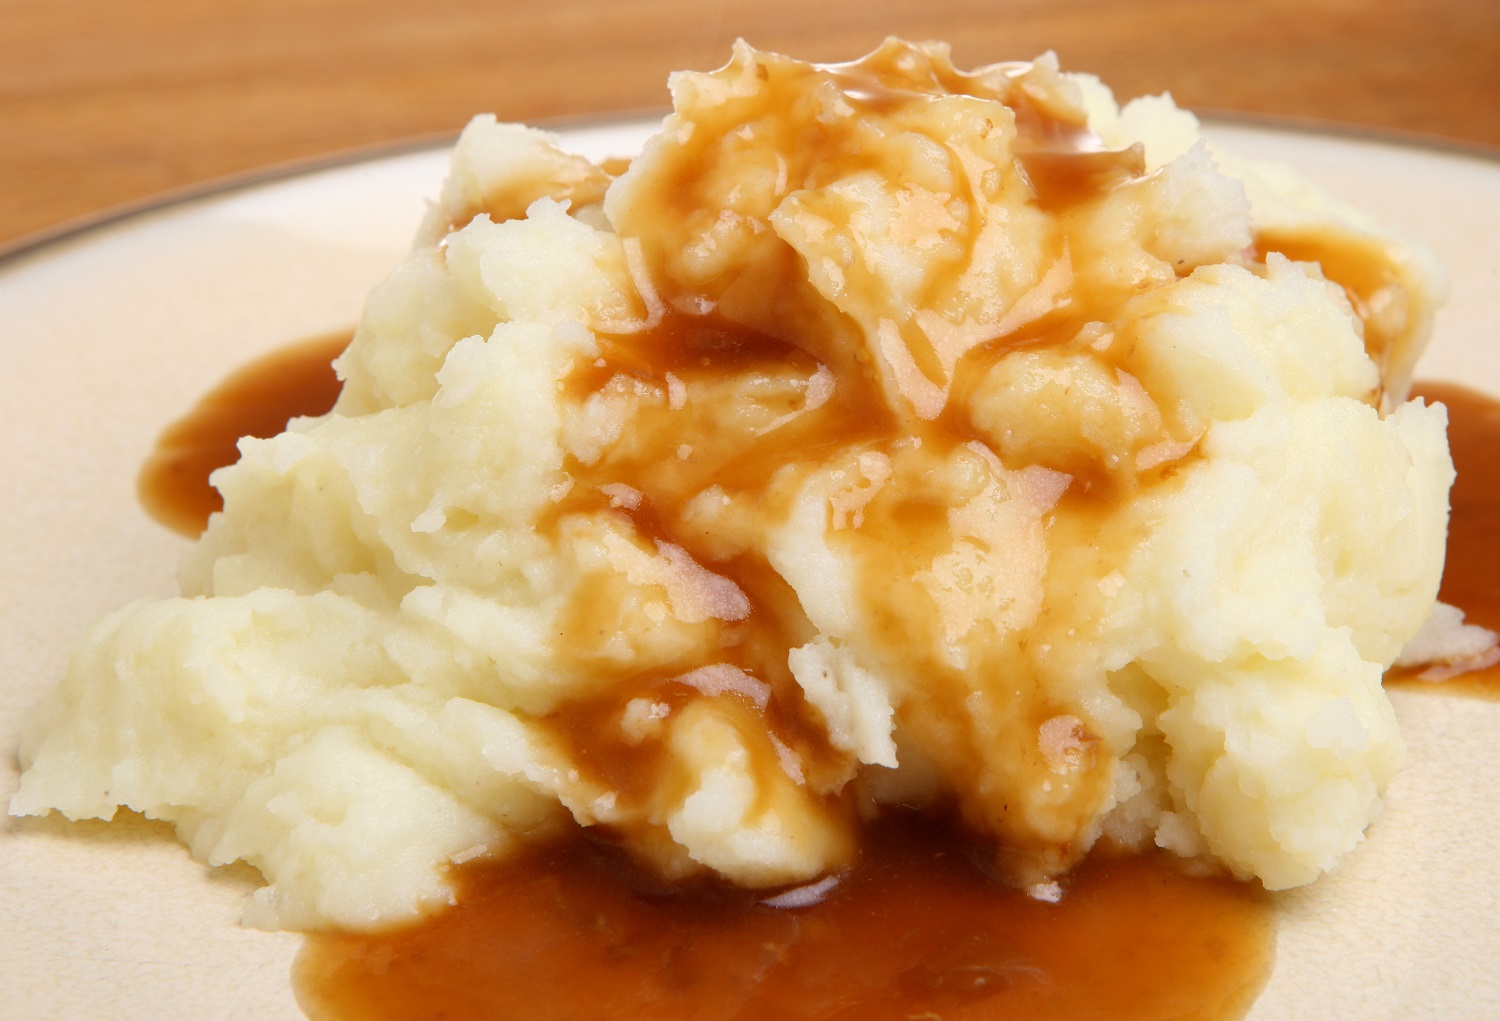 Trick to prepare mashed potatoes in a short time